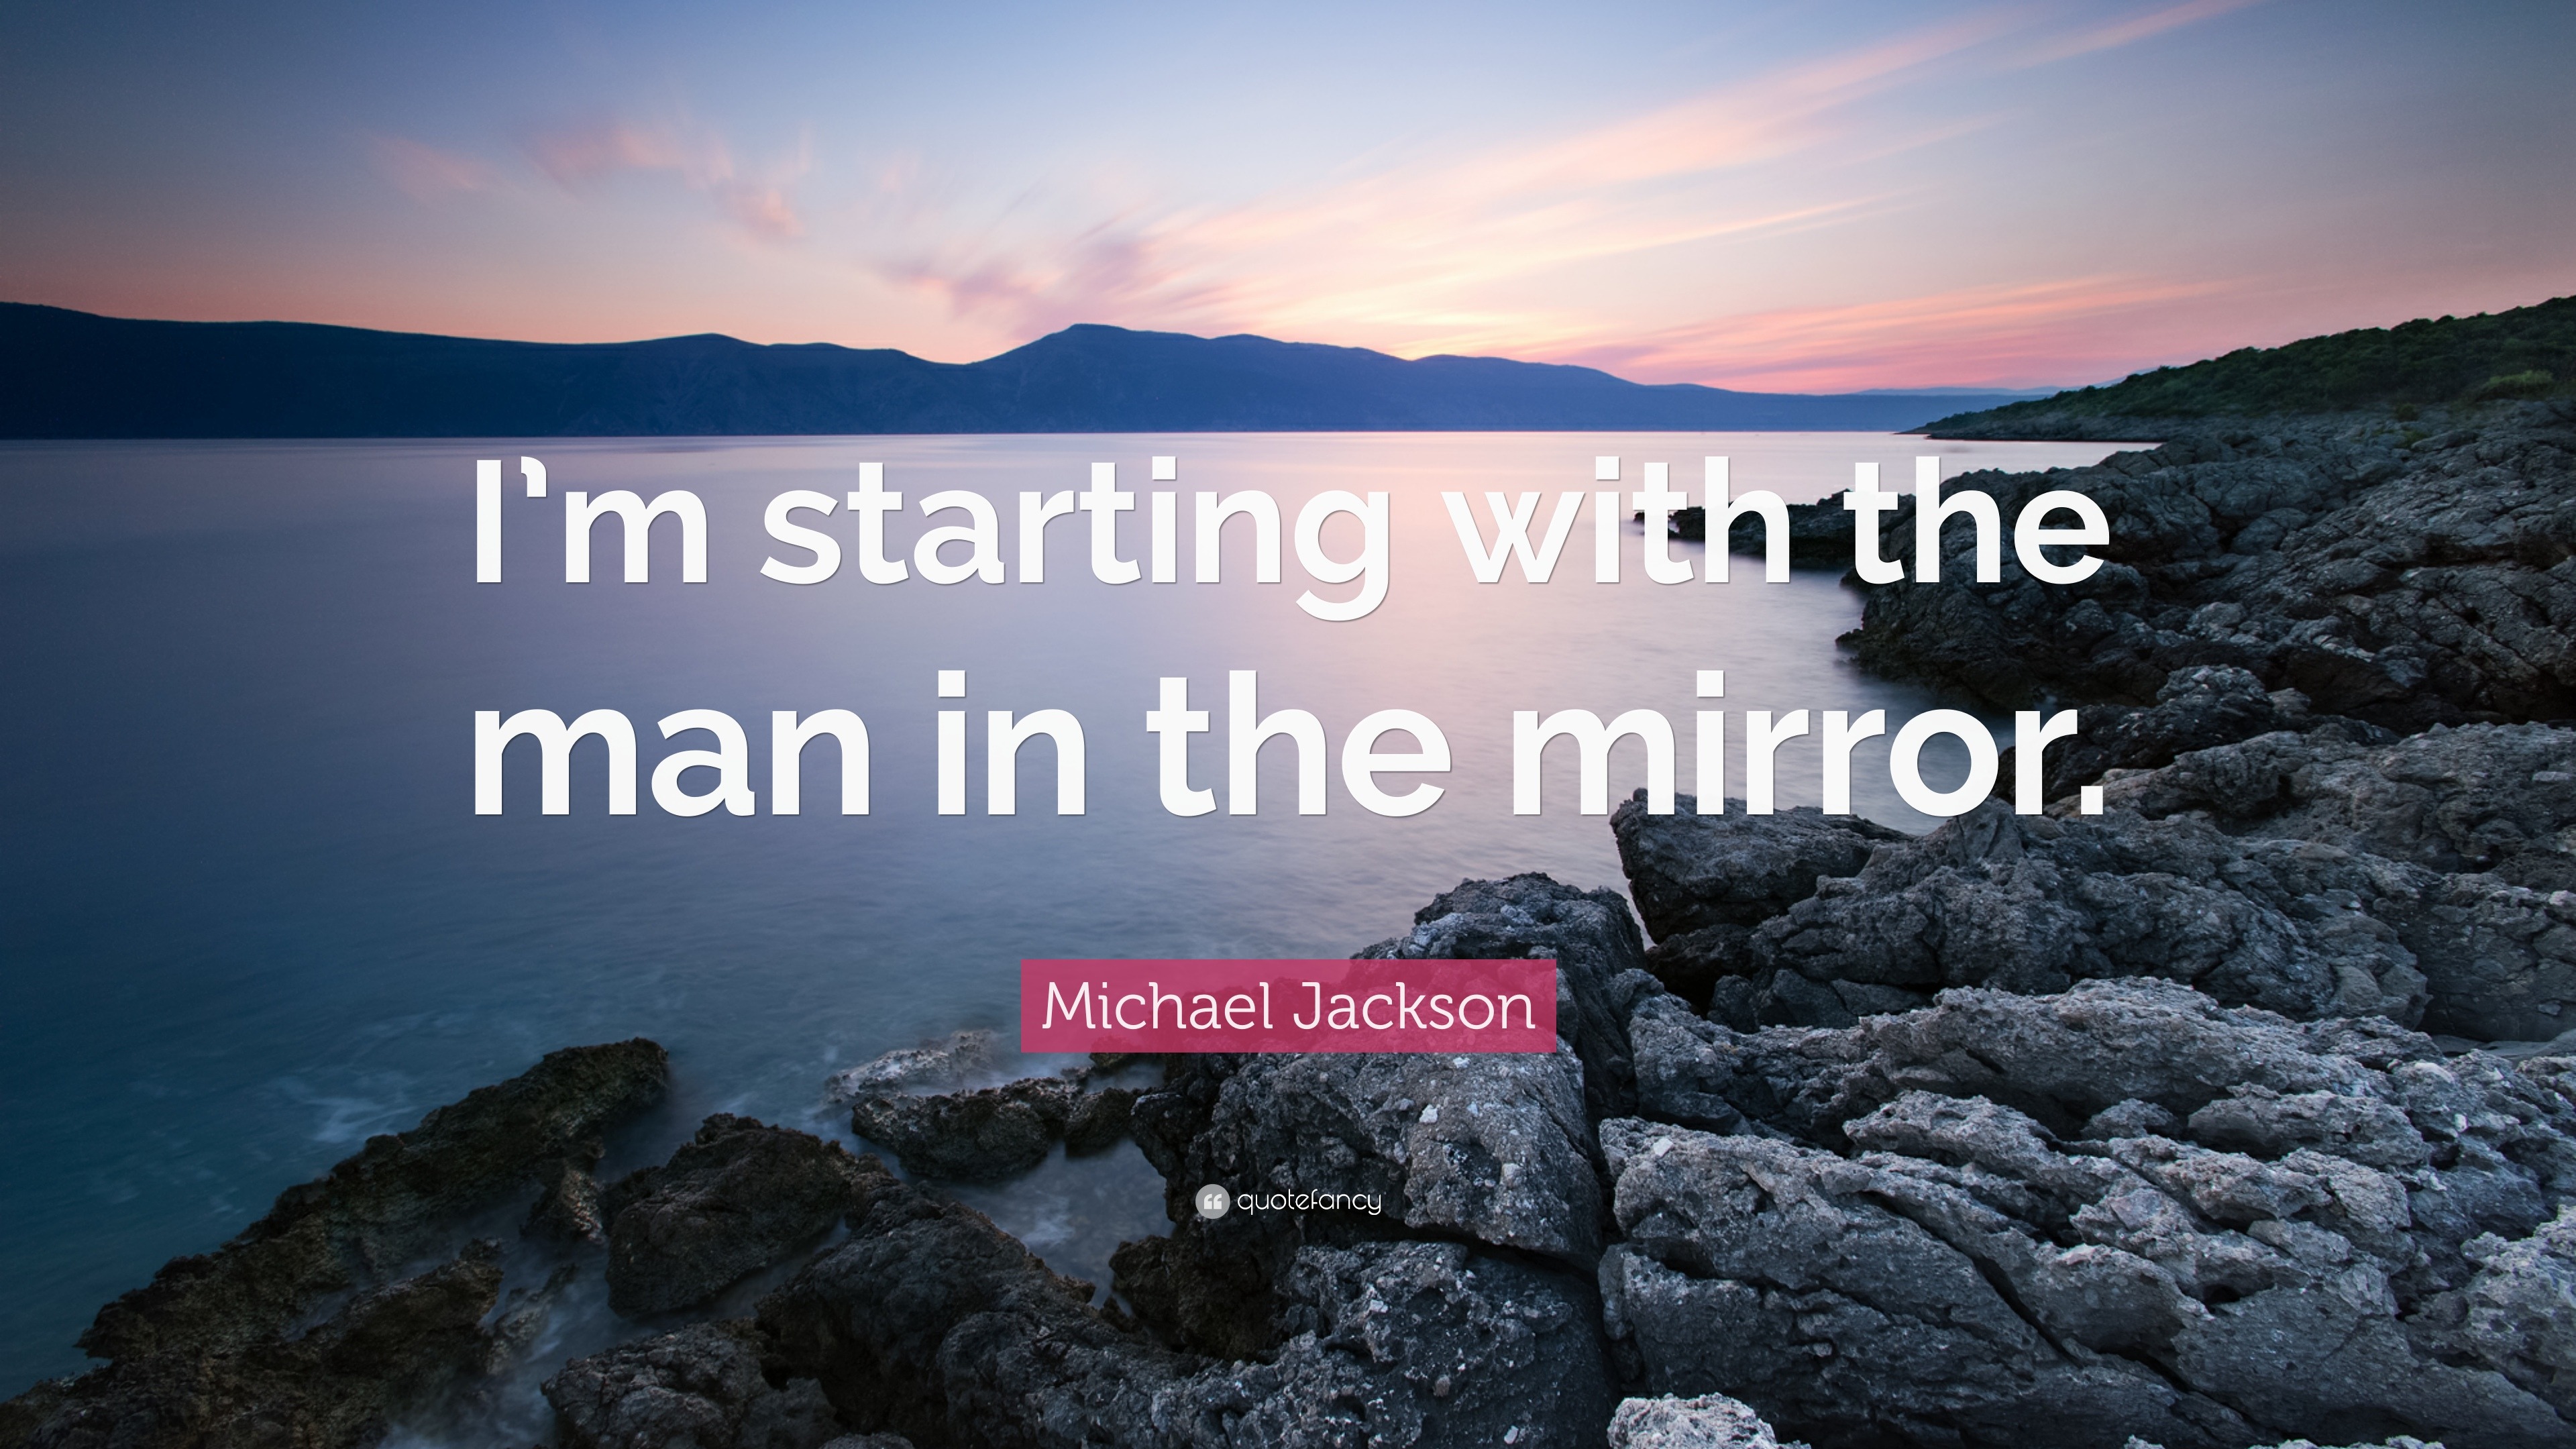 Michael Jackson Quote: “I'm Starting With The Man In The Mirror.”